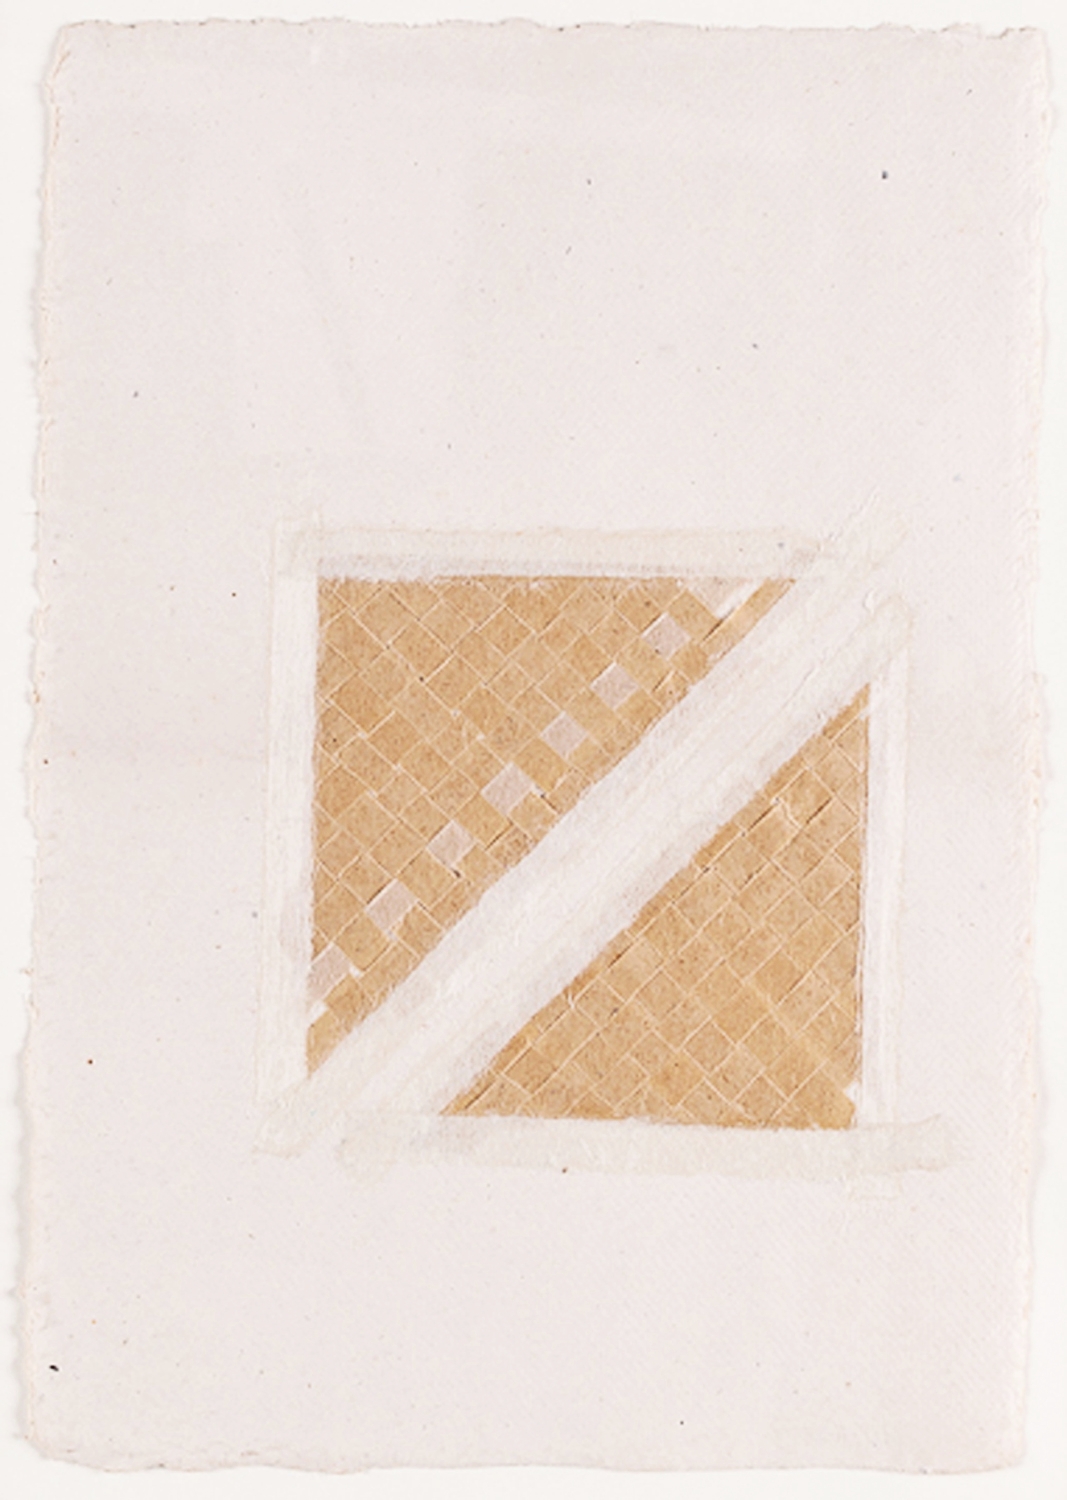  Paper Weaving in Sections. 2008. Paper &amp; Glue. 11" x 9" 